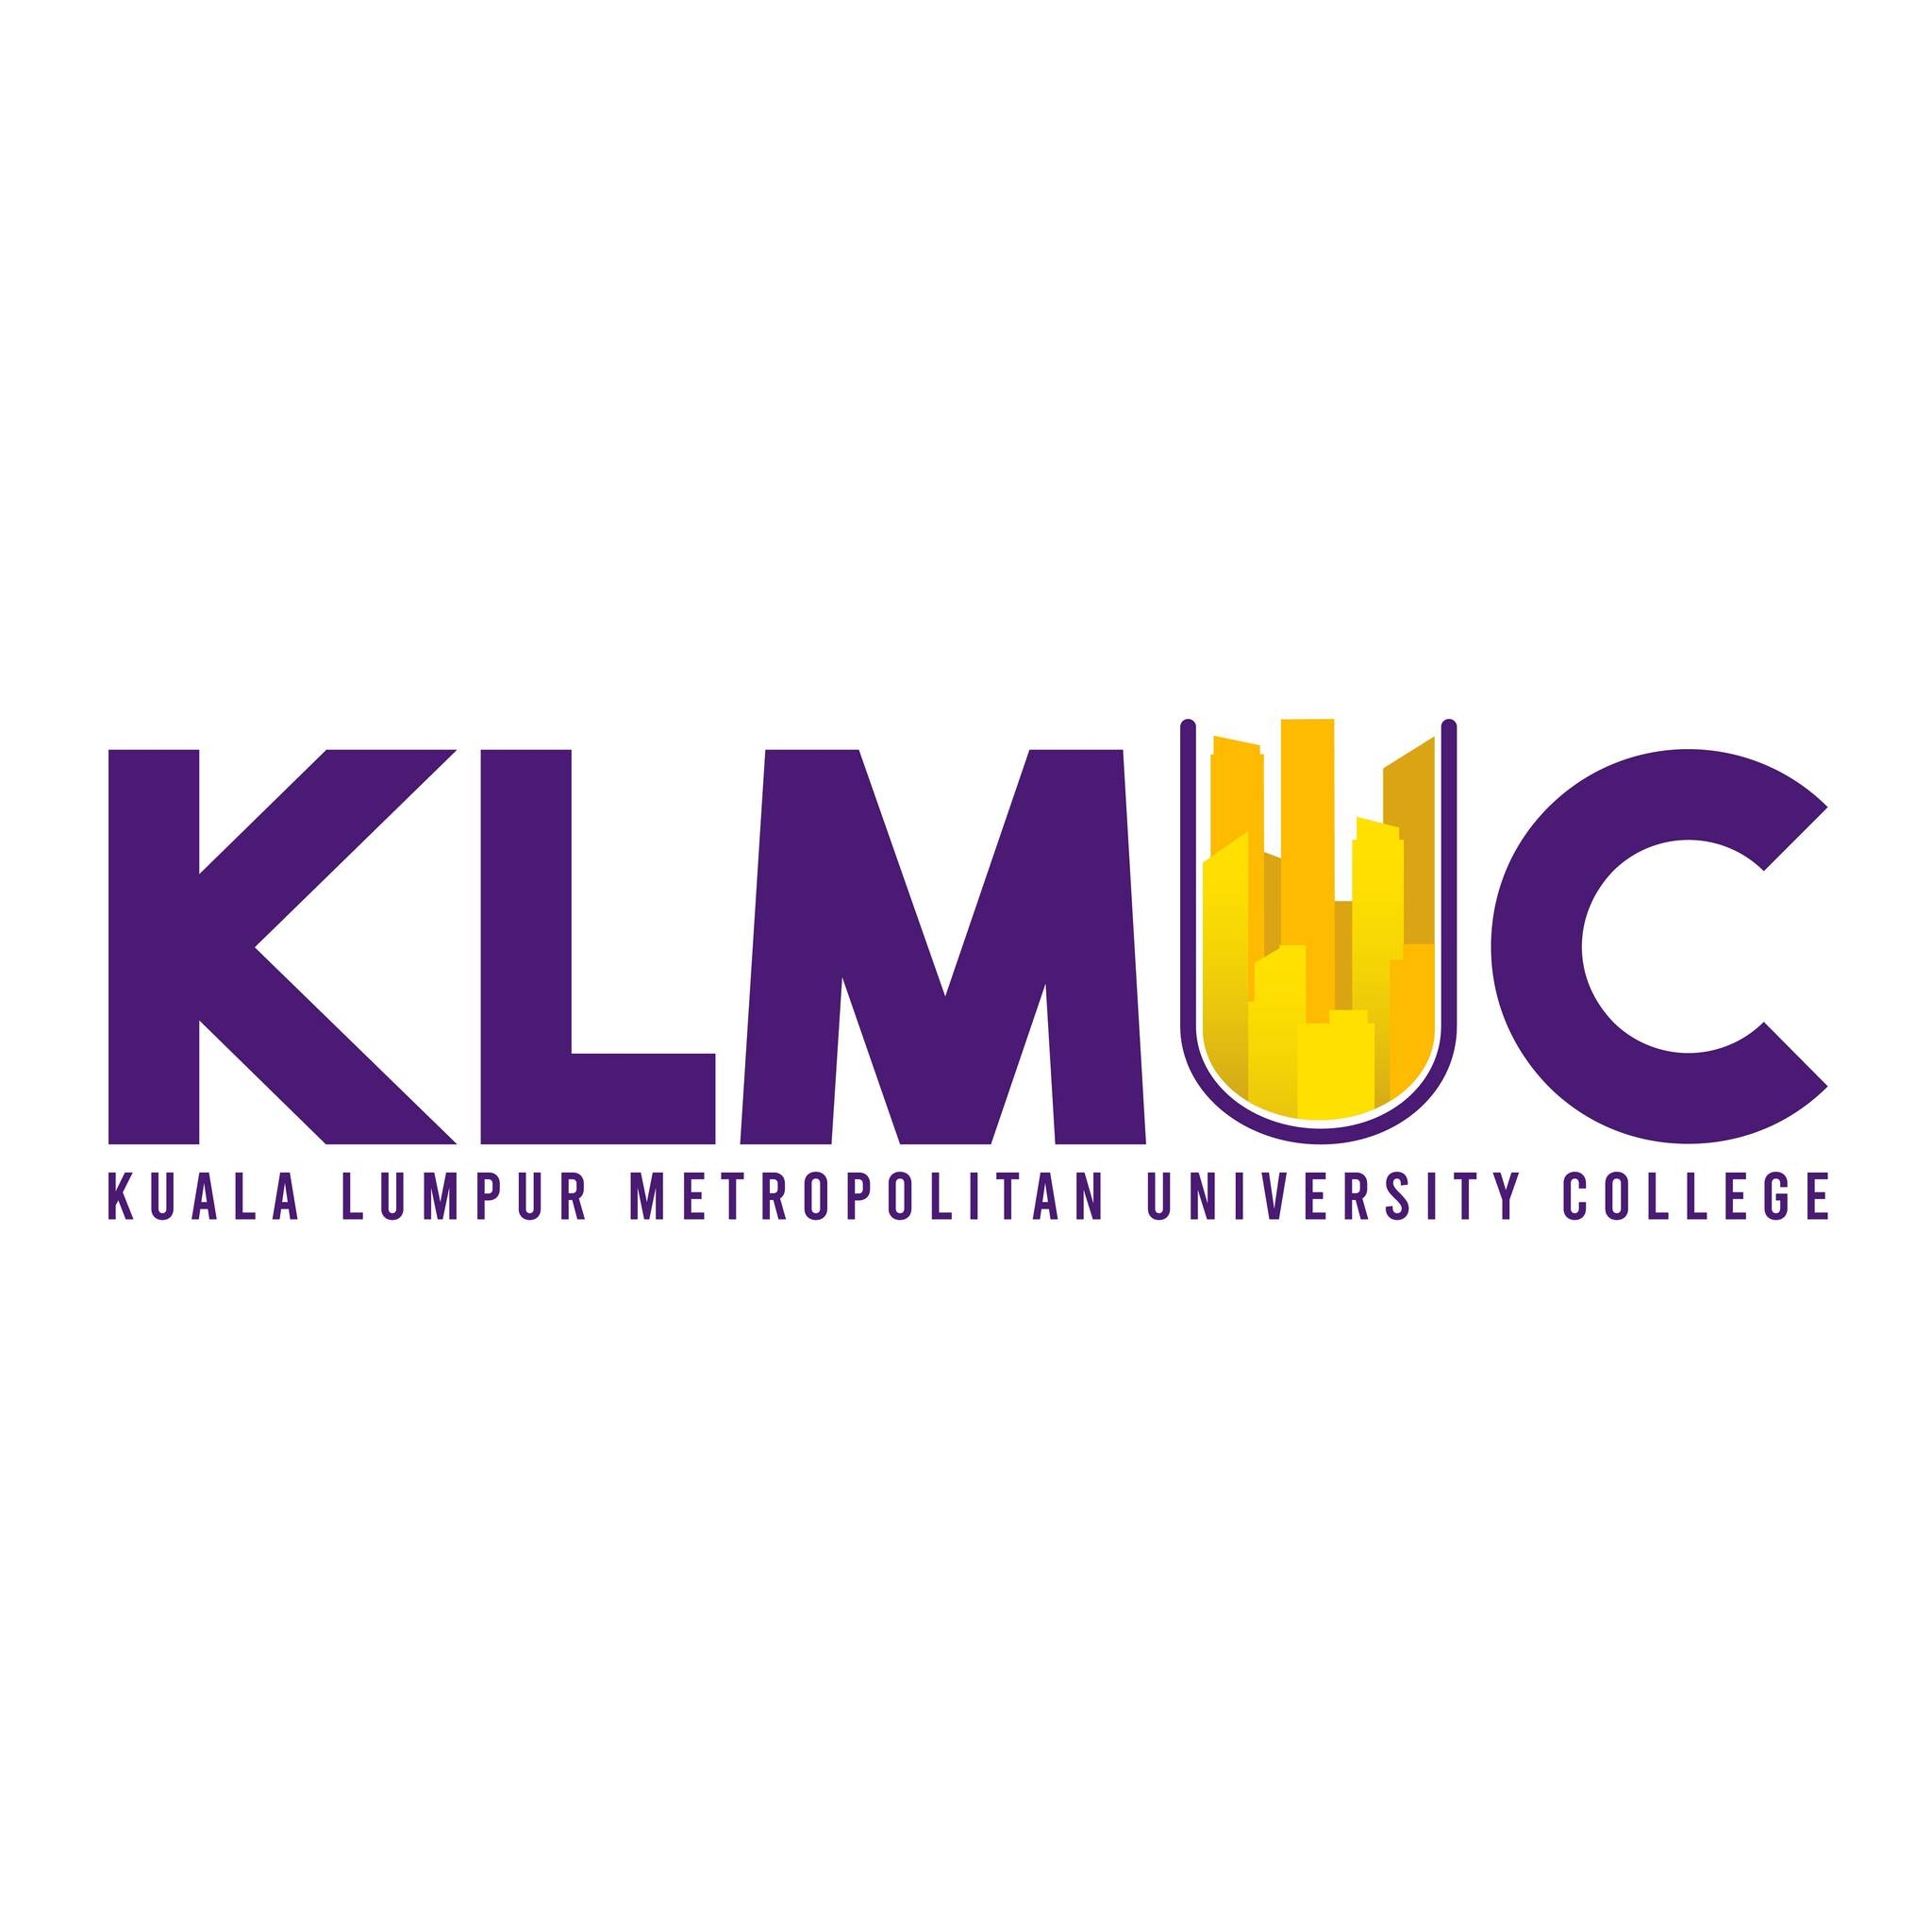 Kuala Lumpur Metropolitan University College (KLMUC) is a progressive and innovative higher learning institution with two distinctive faculties and one centre offering 18 programmes.